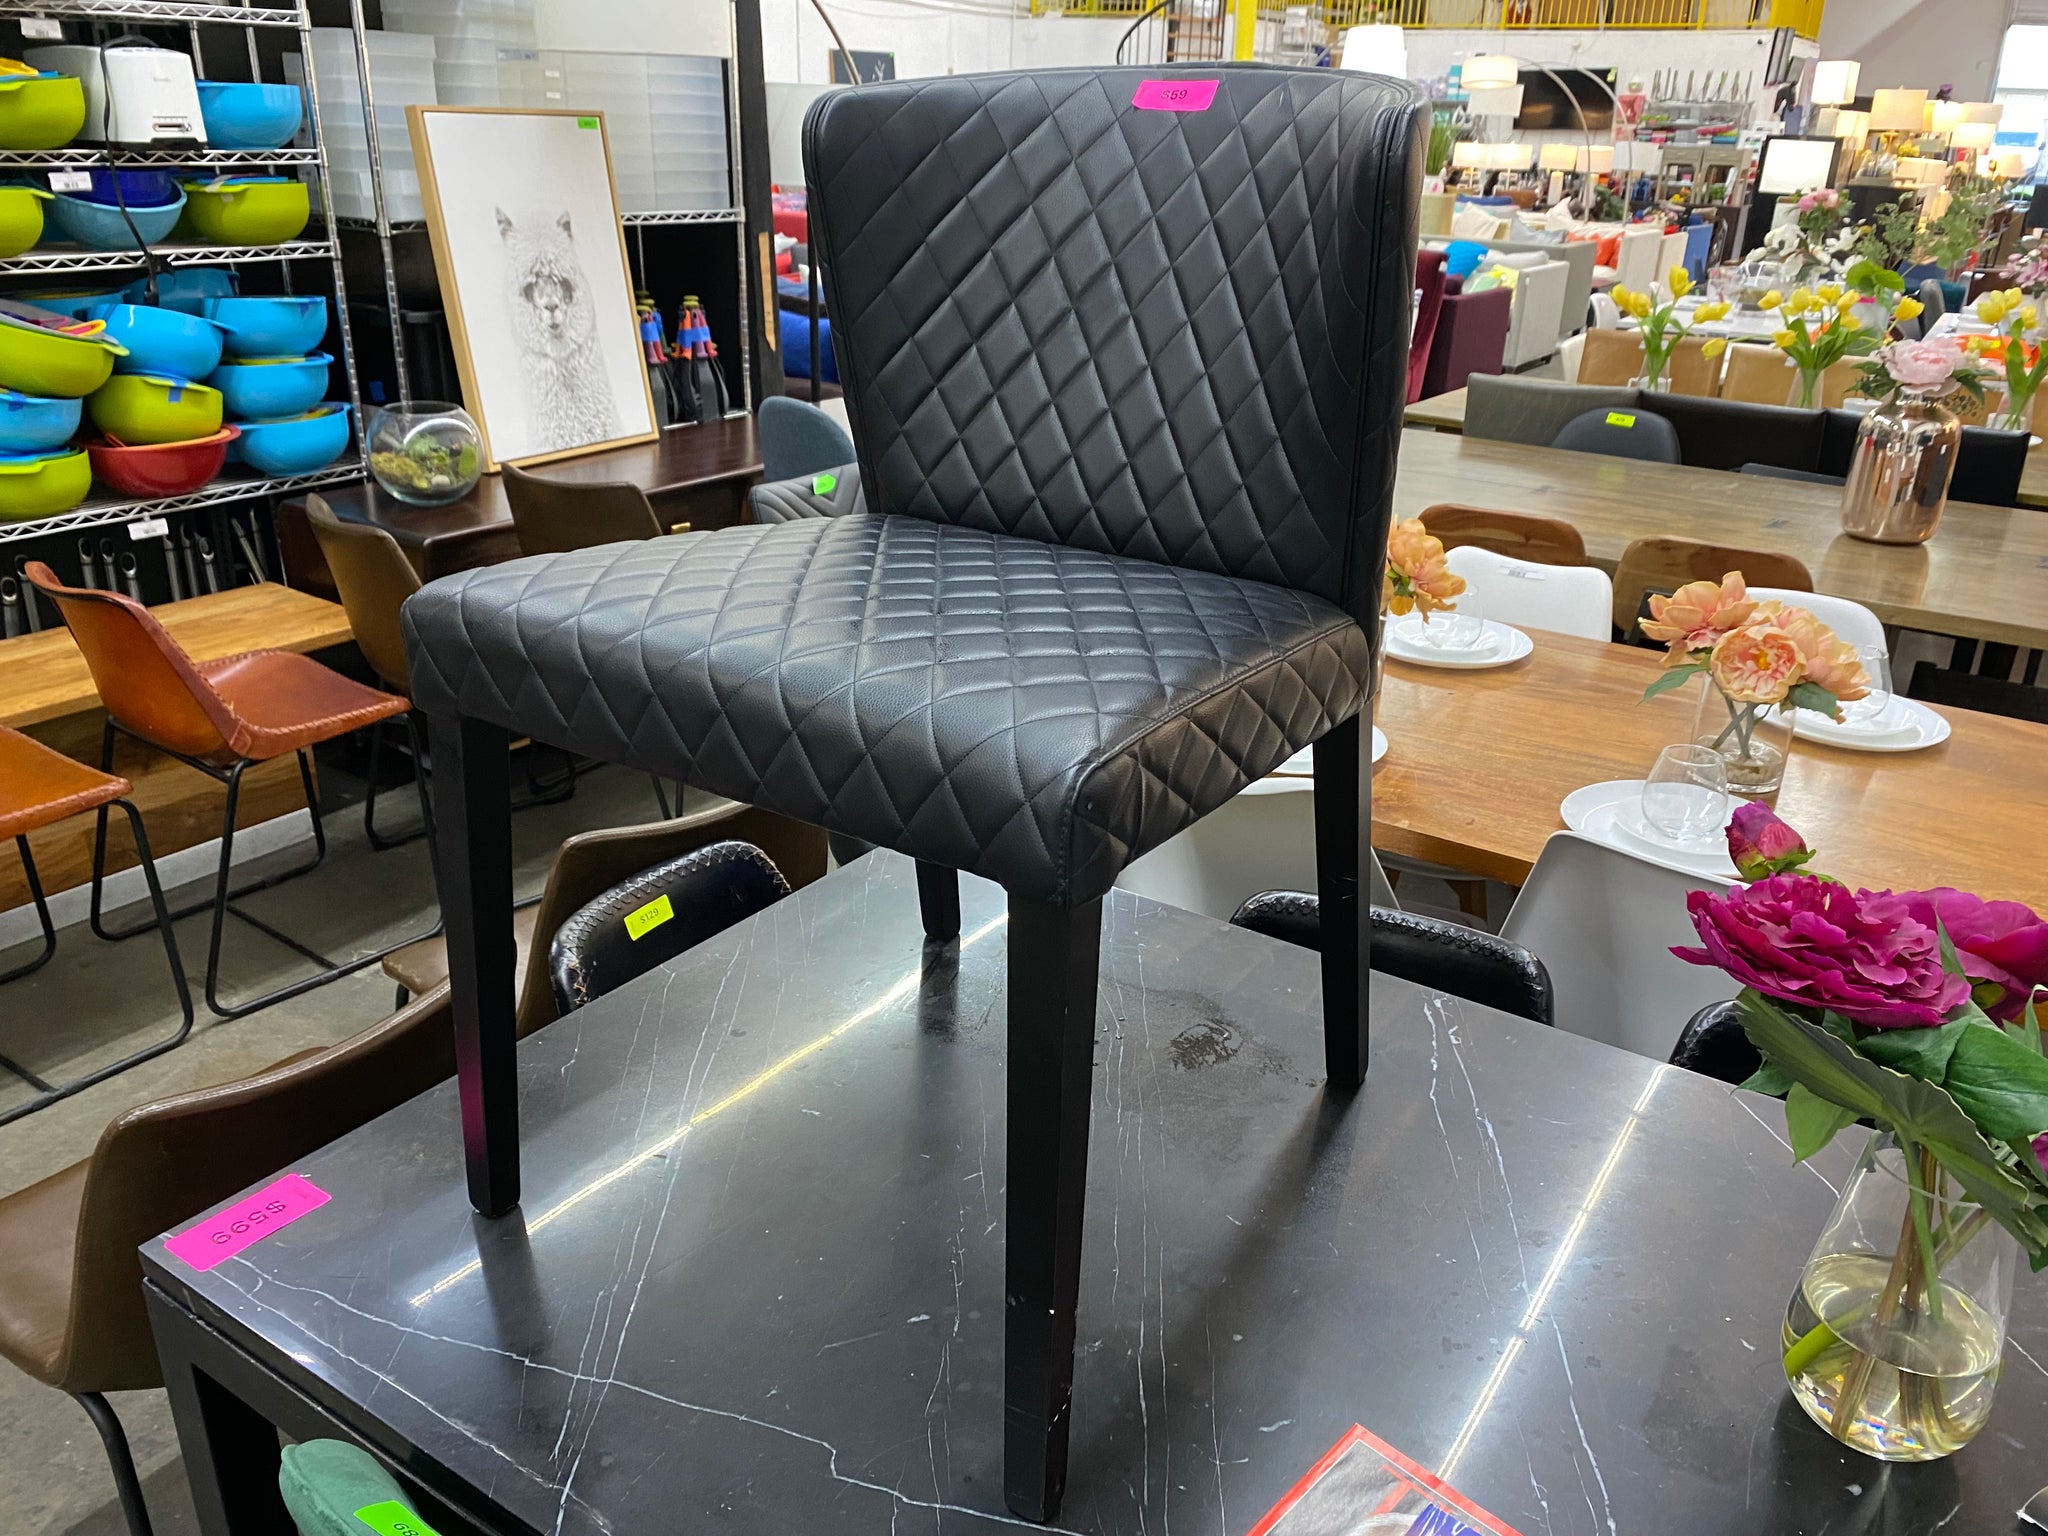 Black Contrast Stitch Leather Dining Chair Black